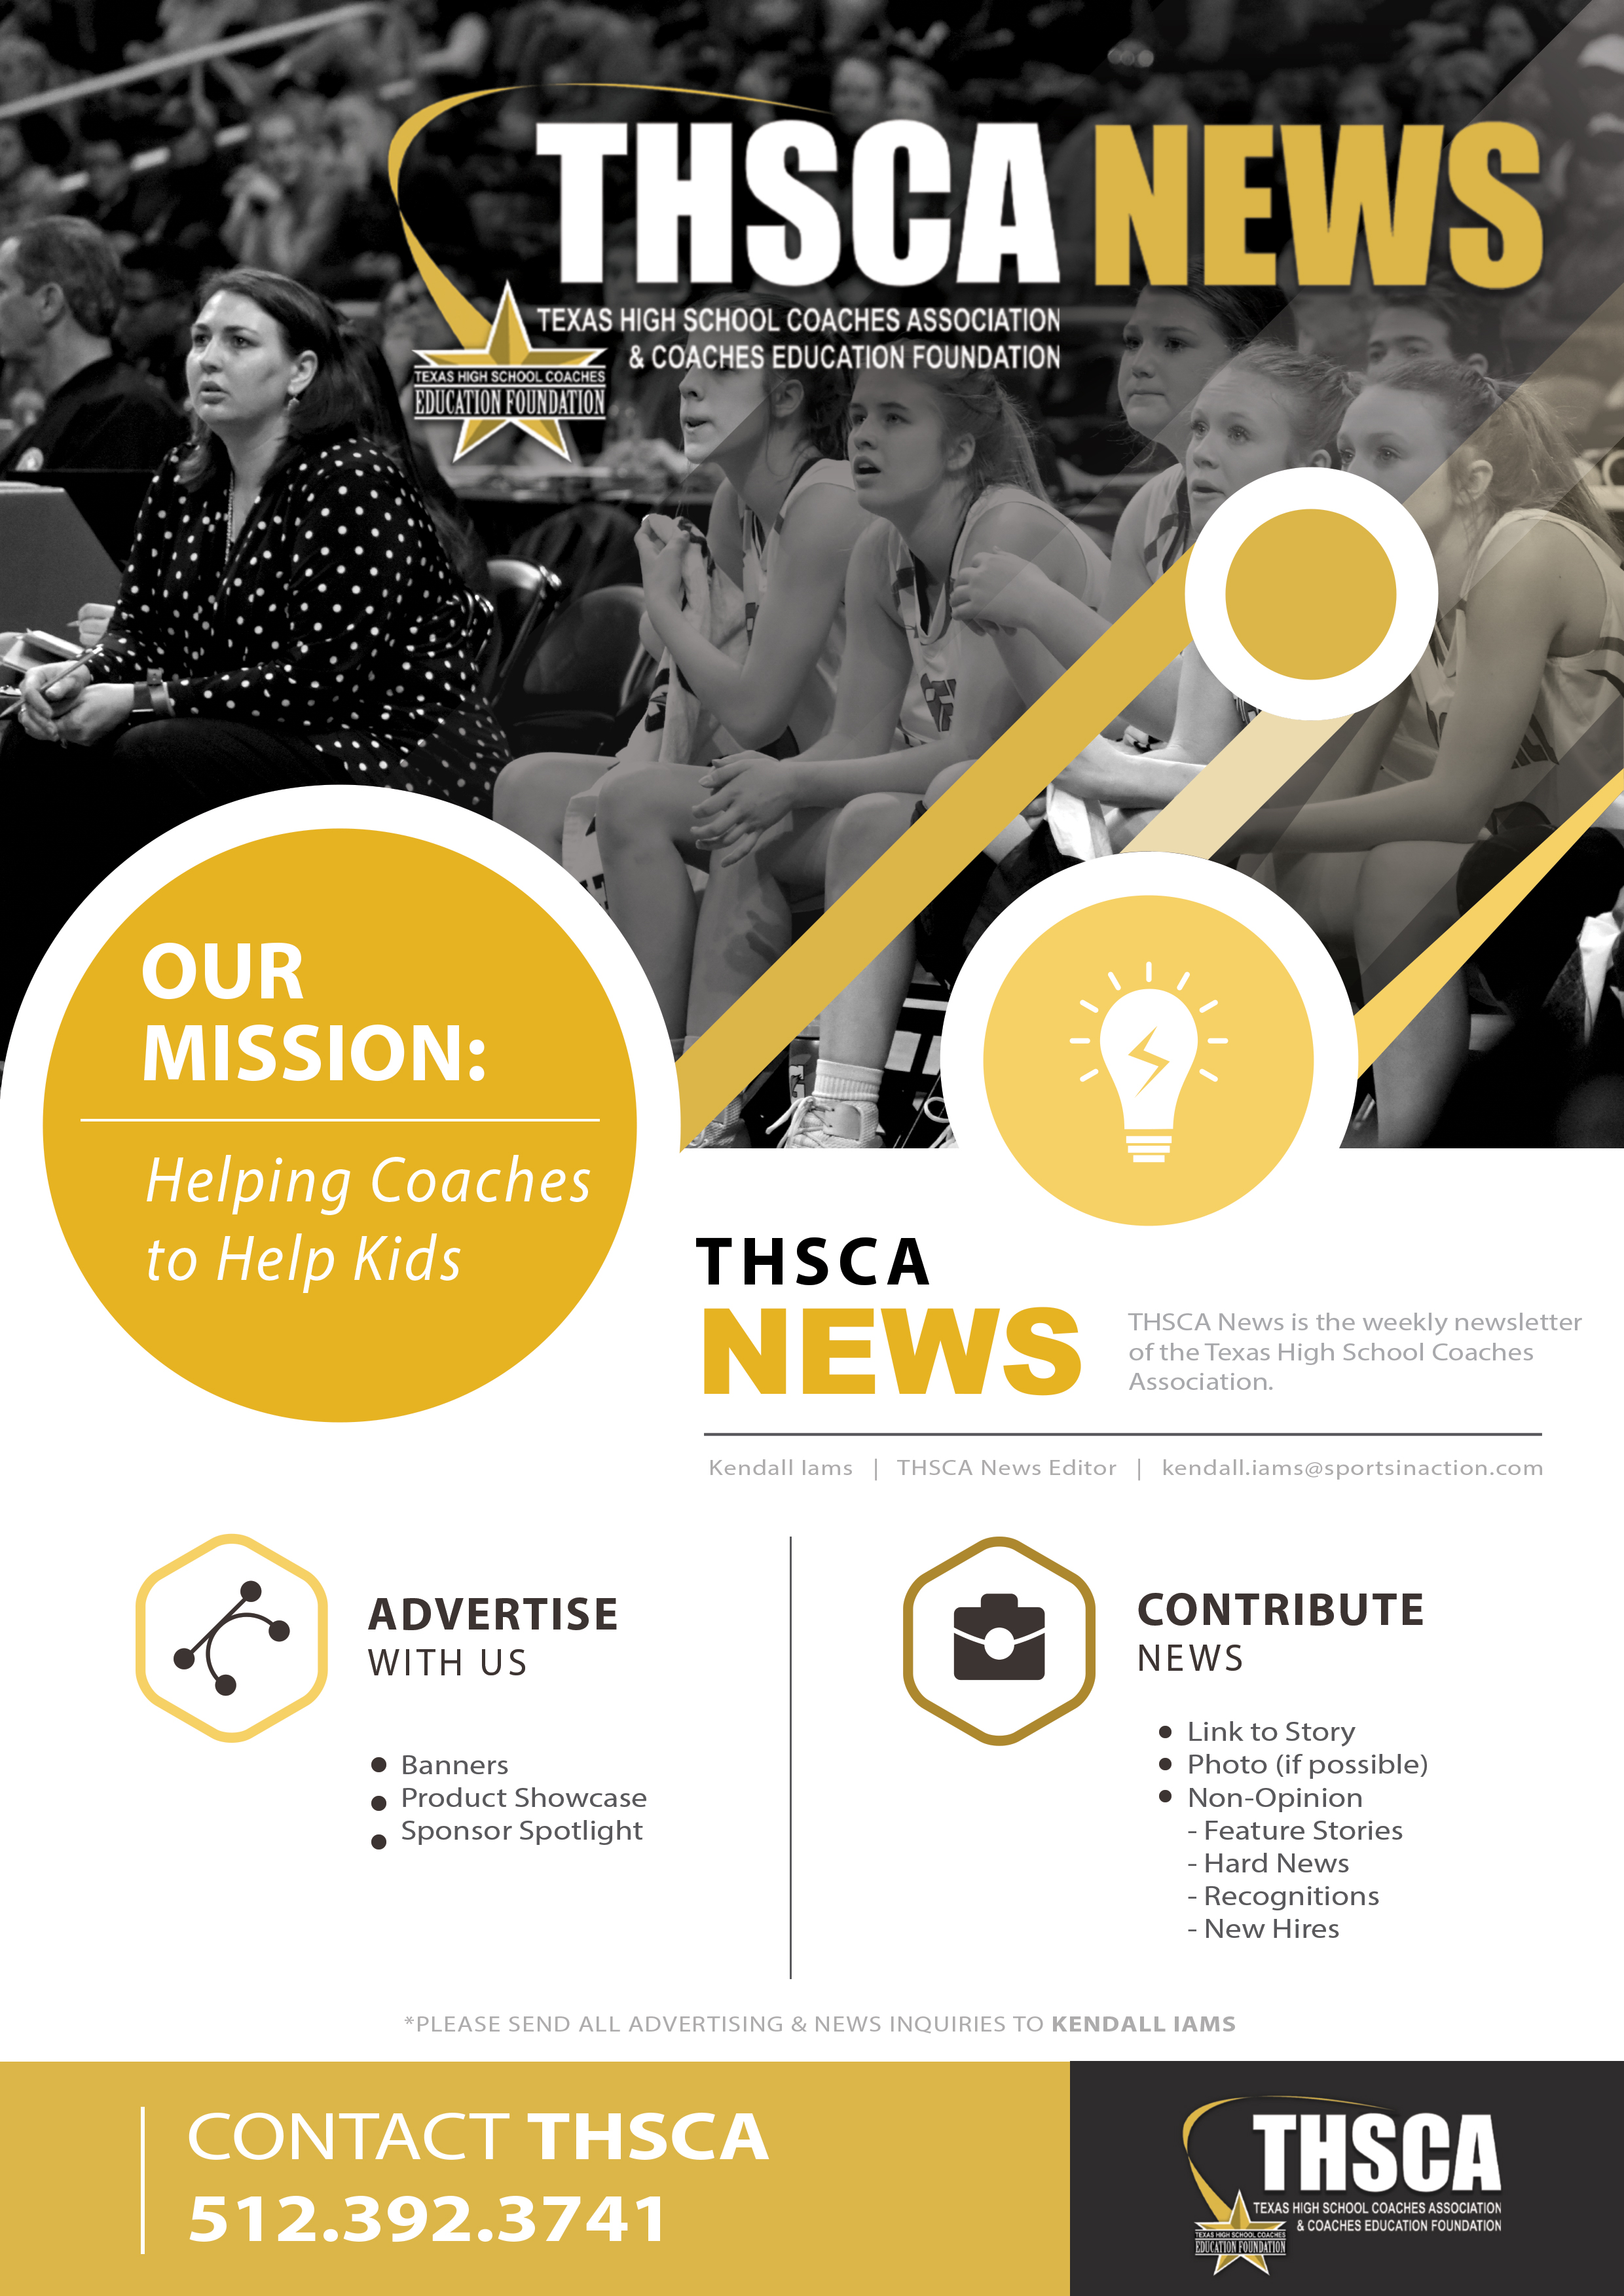 THSCA News and Advertising Information graphic